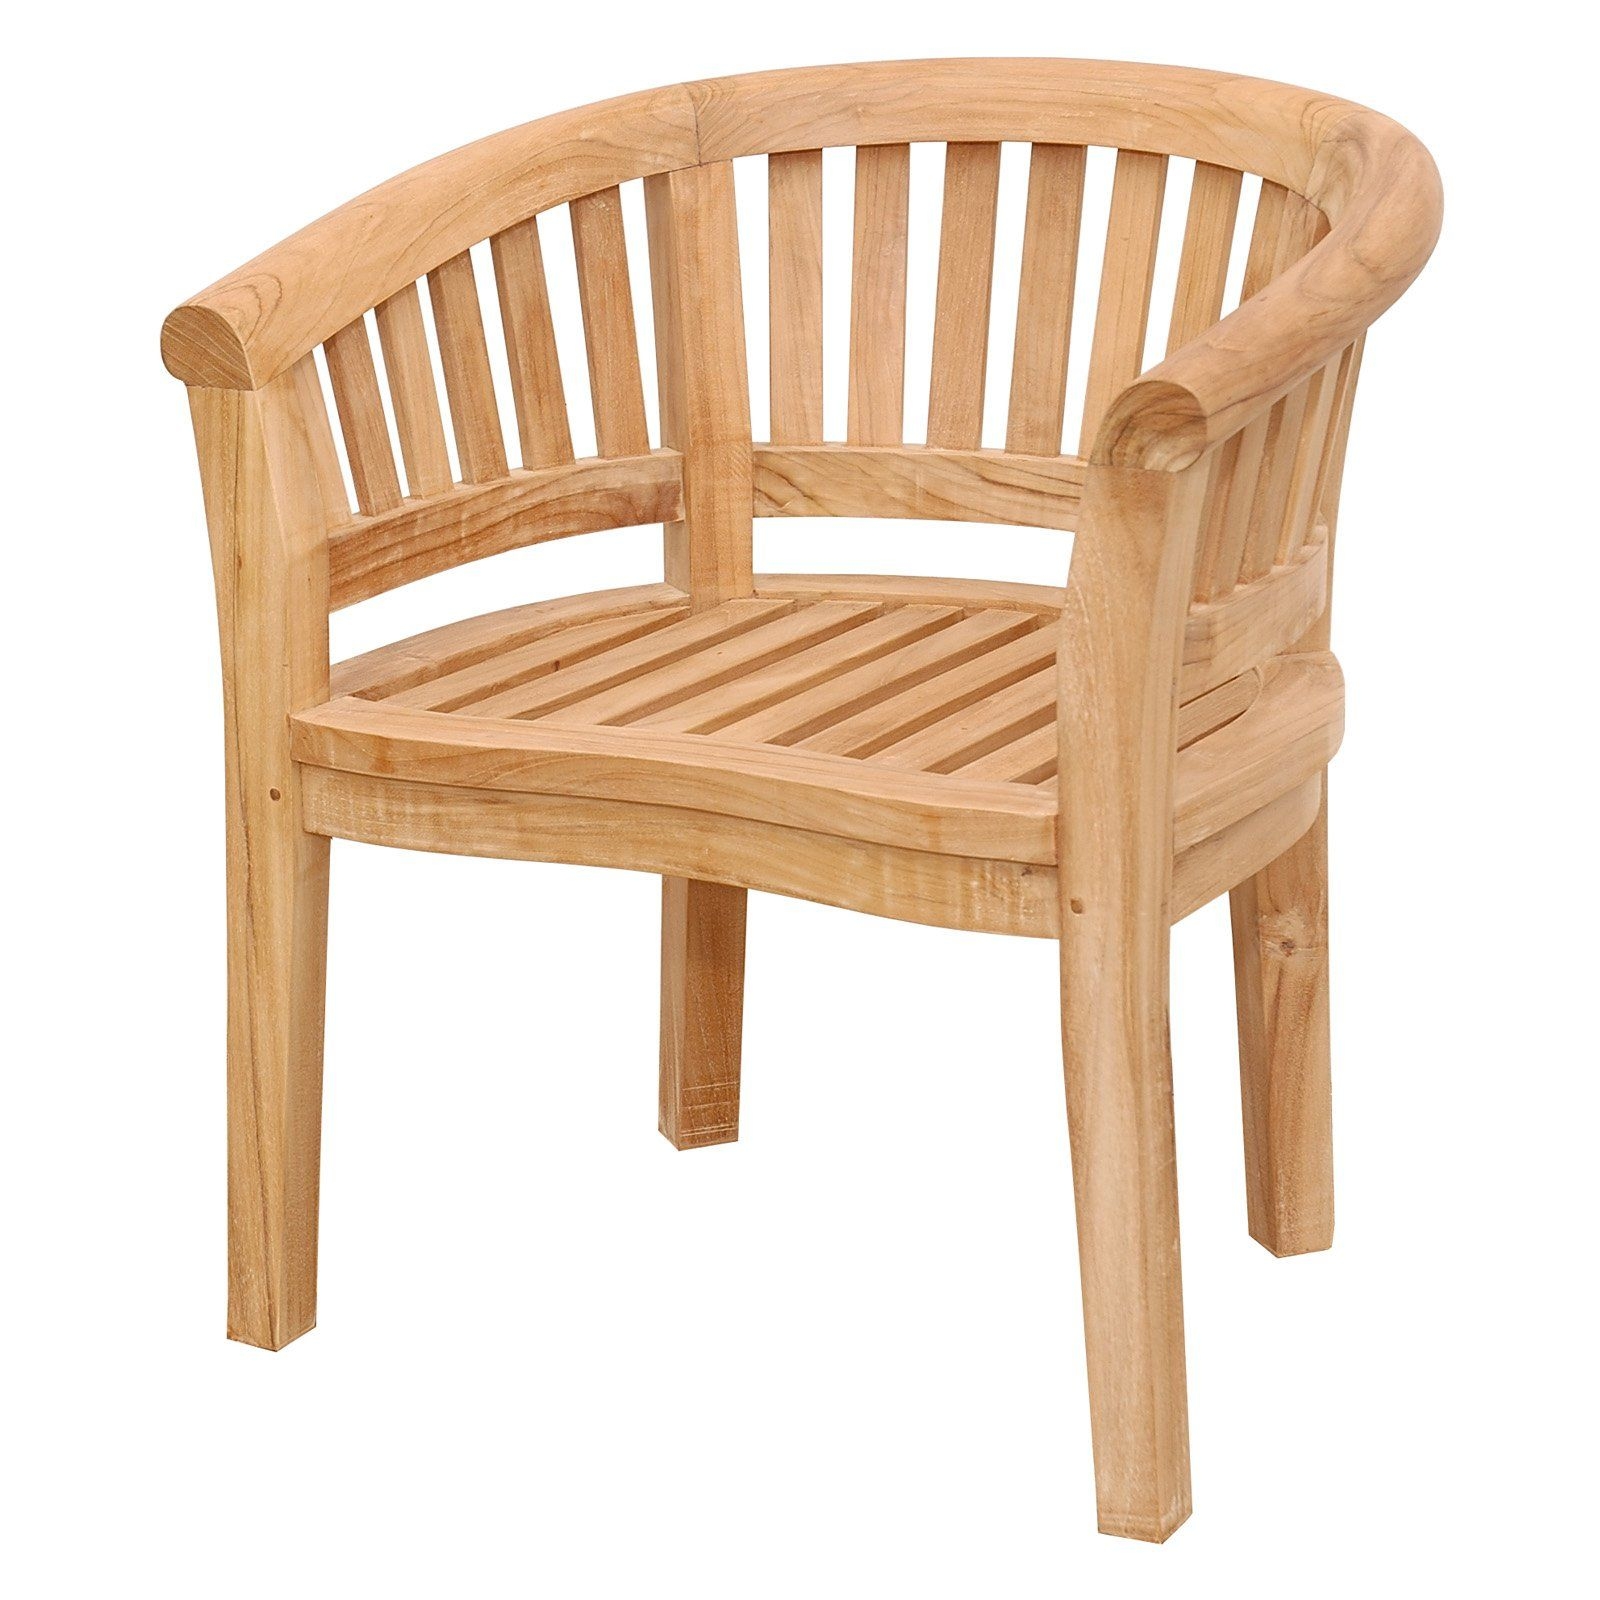 Wood outdoor arm chairs